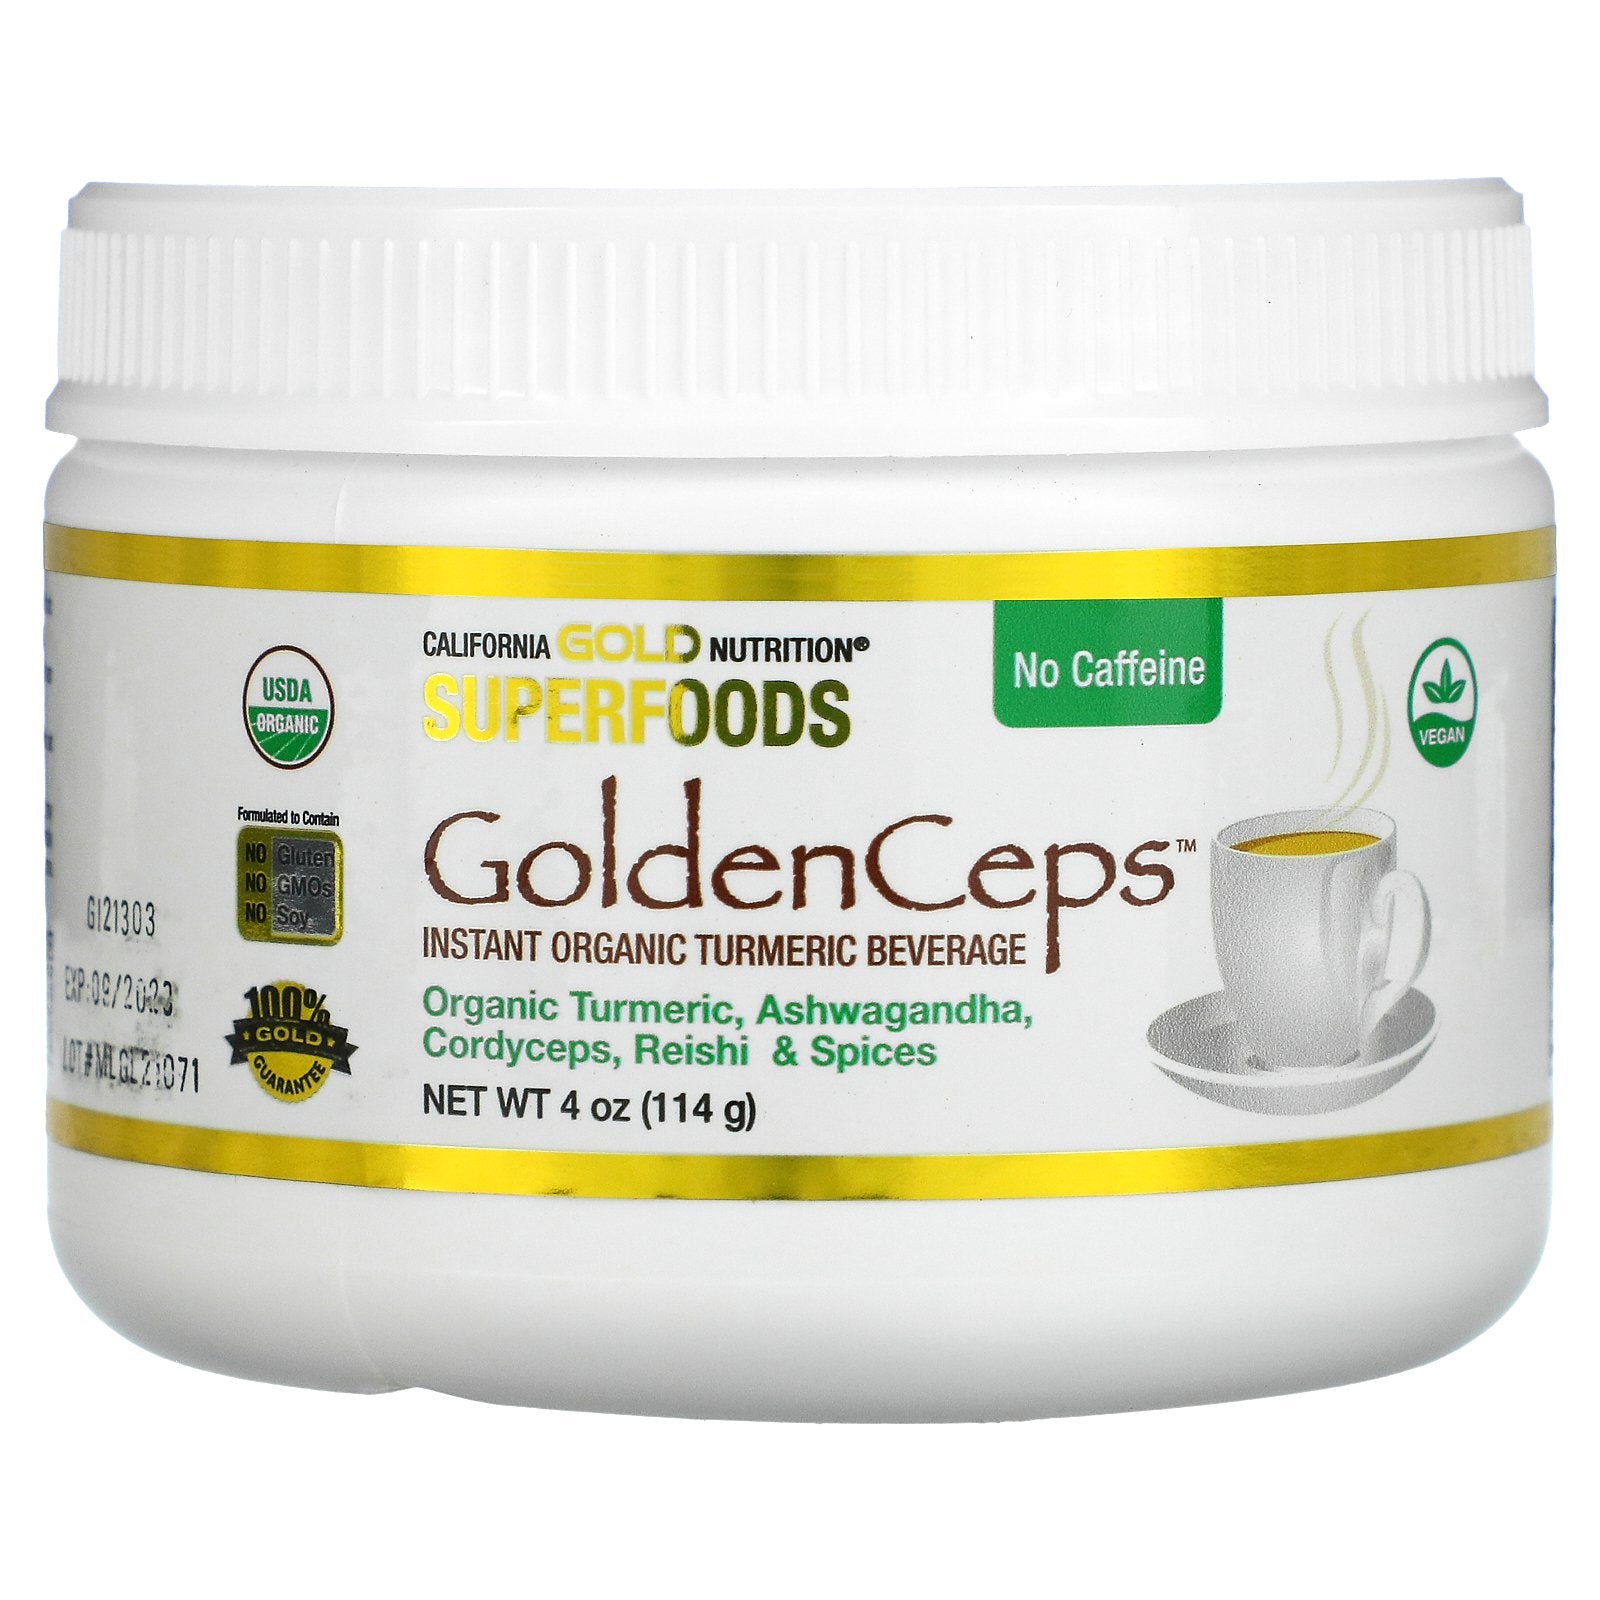 California Gold Nutrition, GoldenCeps, Organic Turmeric with Adaptogens